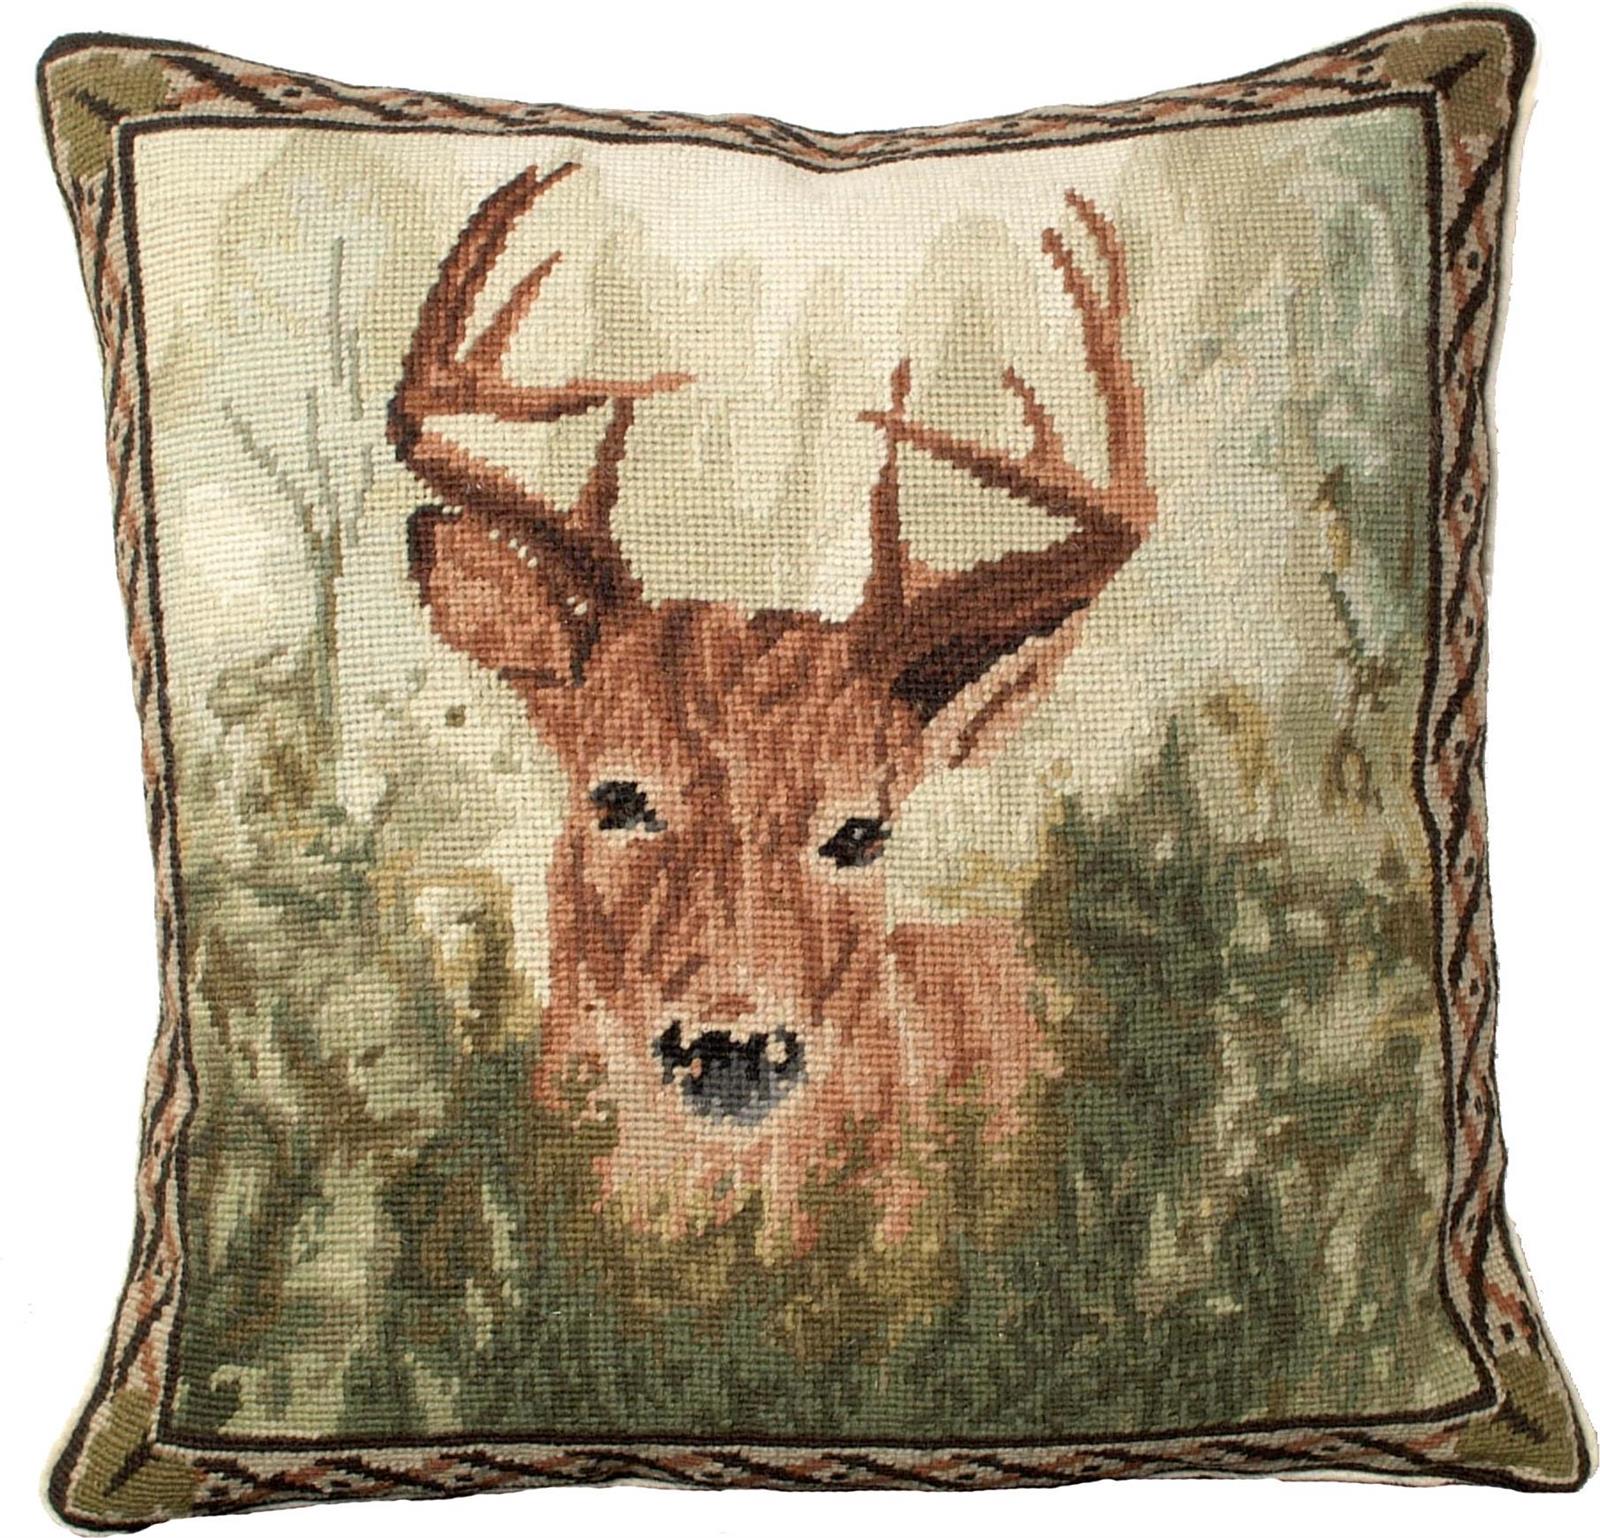 Throw Pillow Needlepoint Stag in Forest 18x18 Beige Wool Cotton Velvet-Image 2